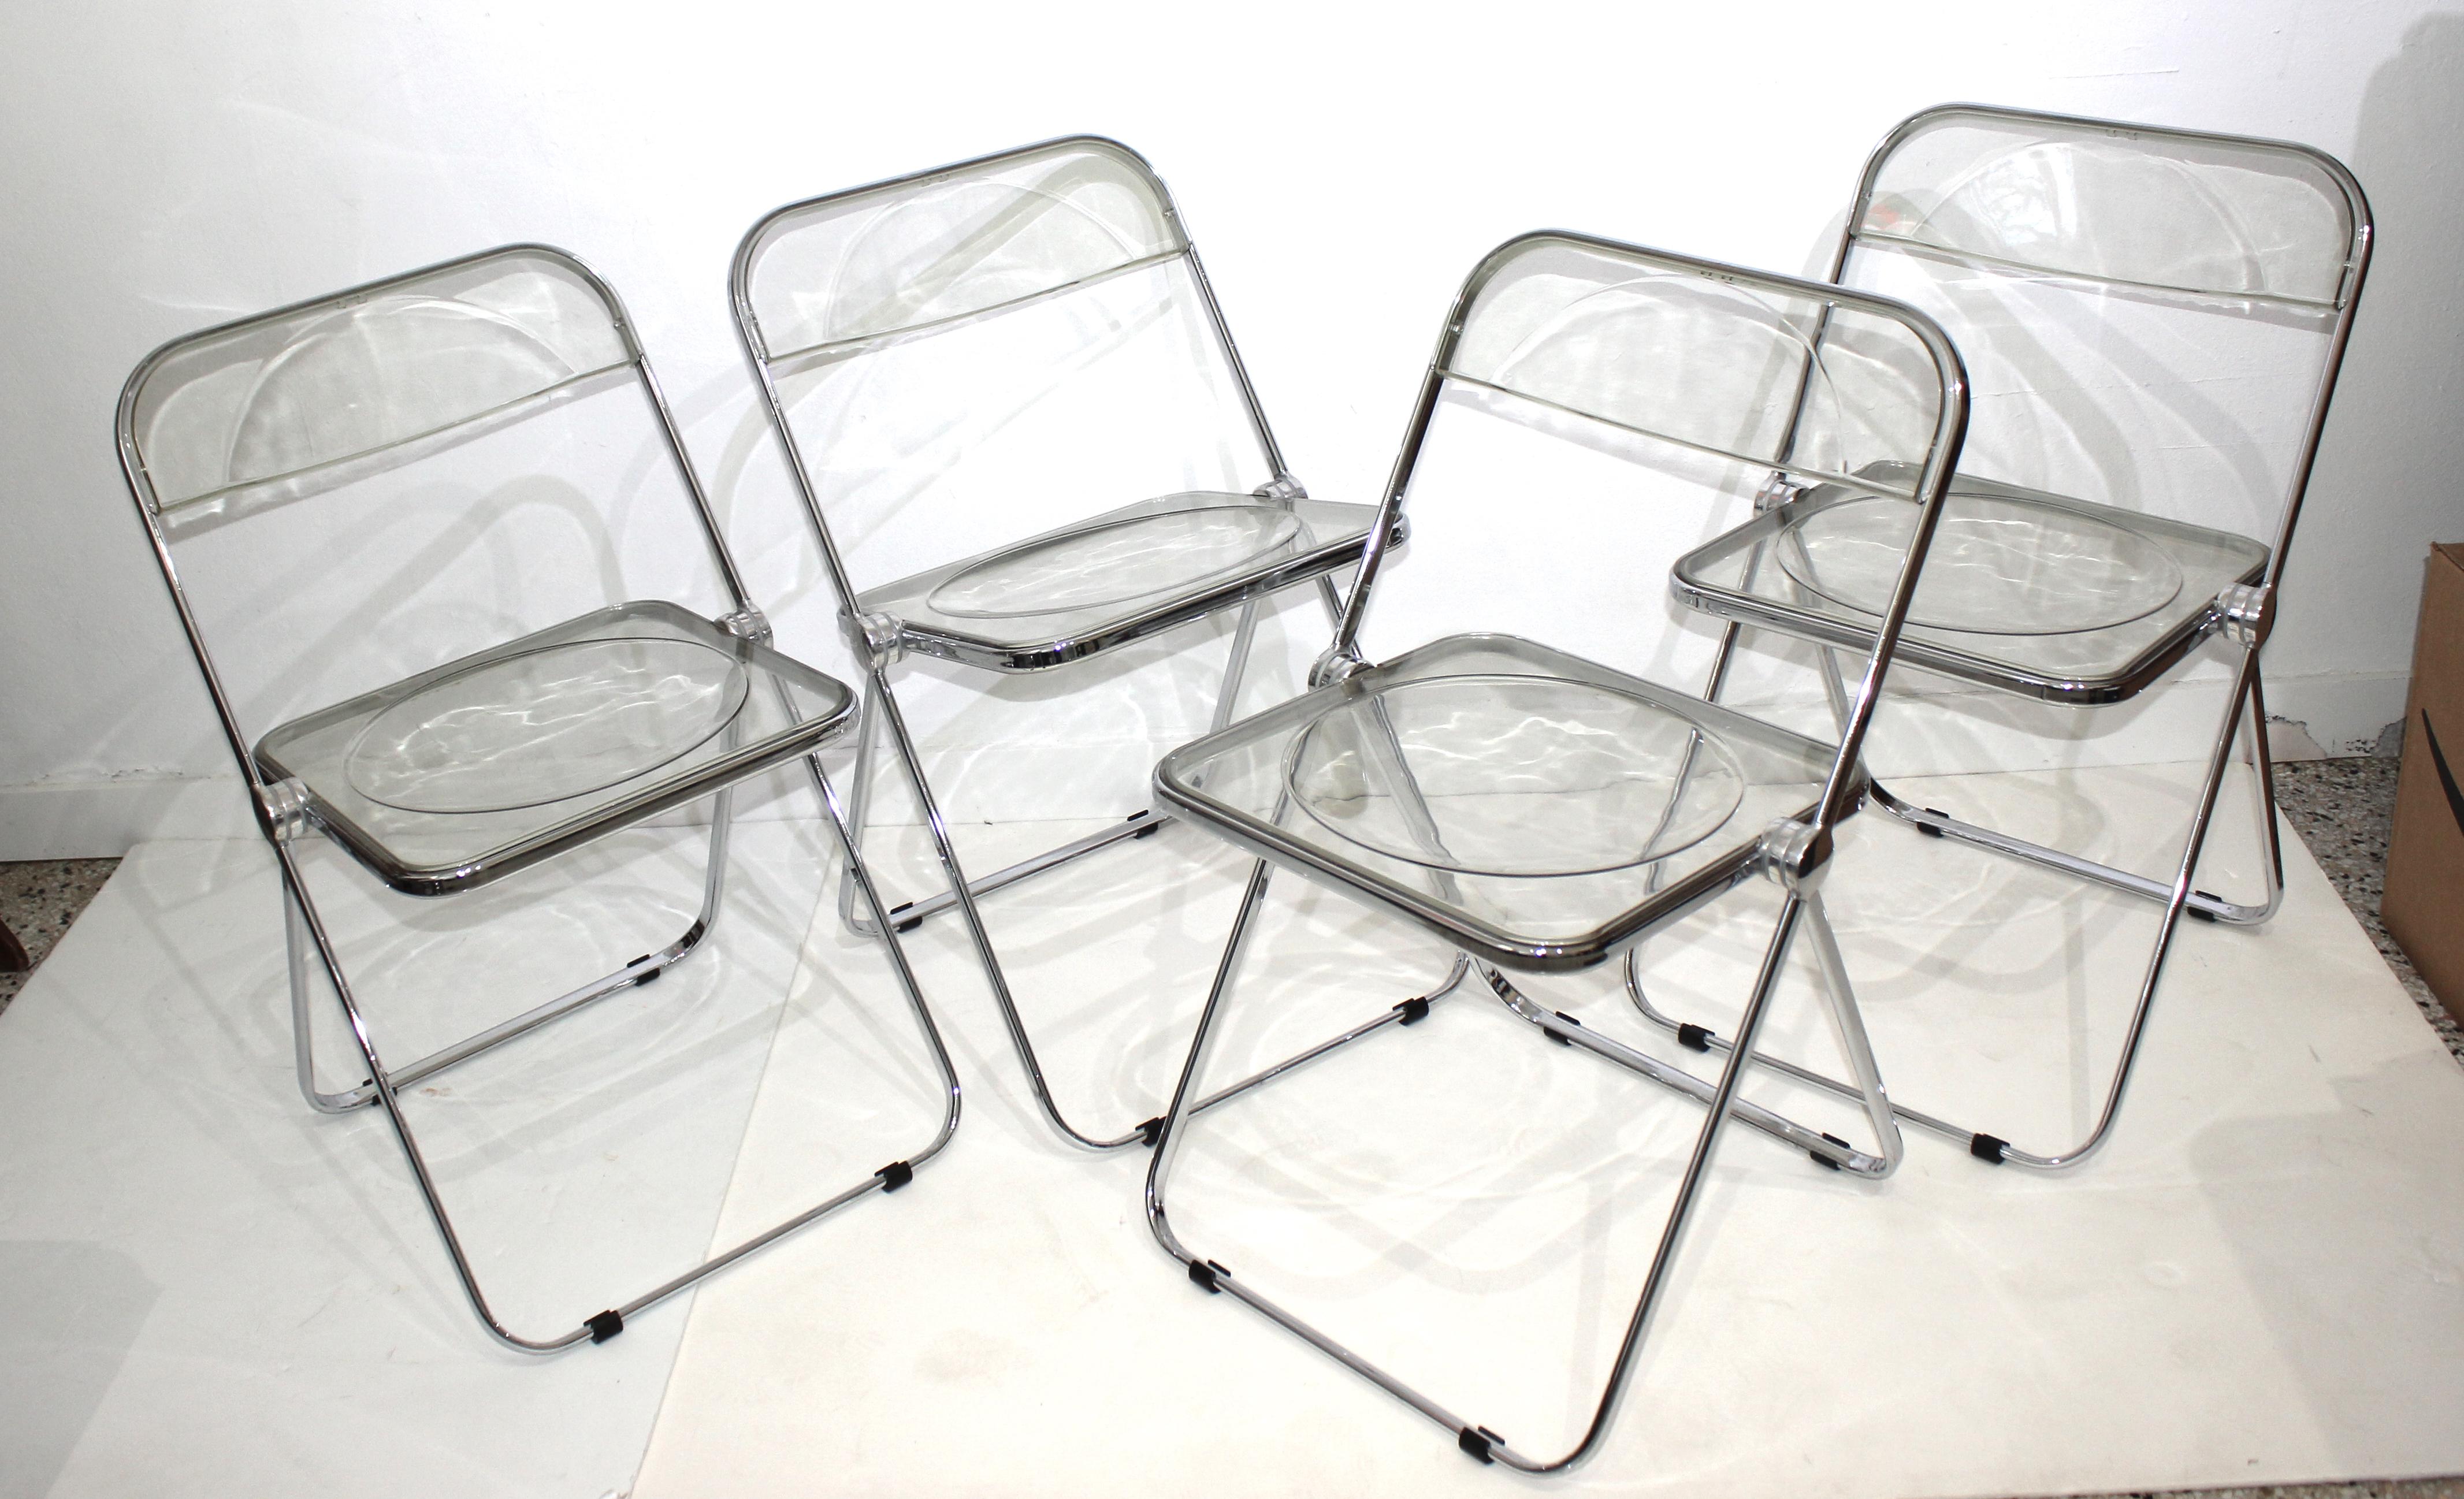 Italian Design Plia Folding chairs in Lucite and chrome by Castelli from a Palm Beach Estate.

Size opened is 18.25w x 18 d x 30